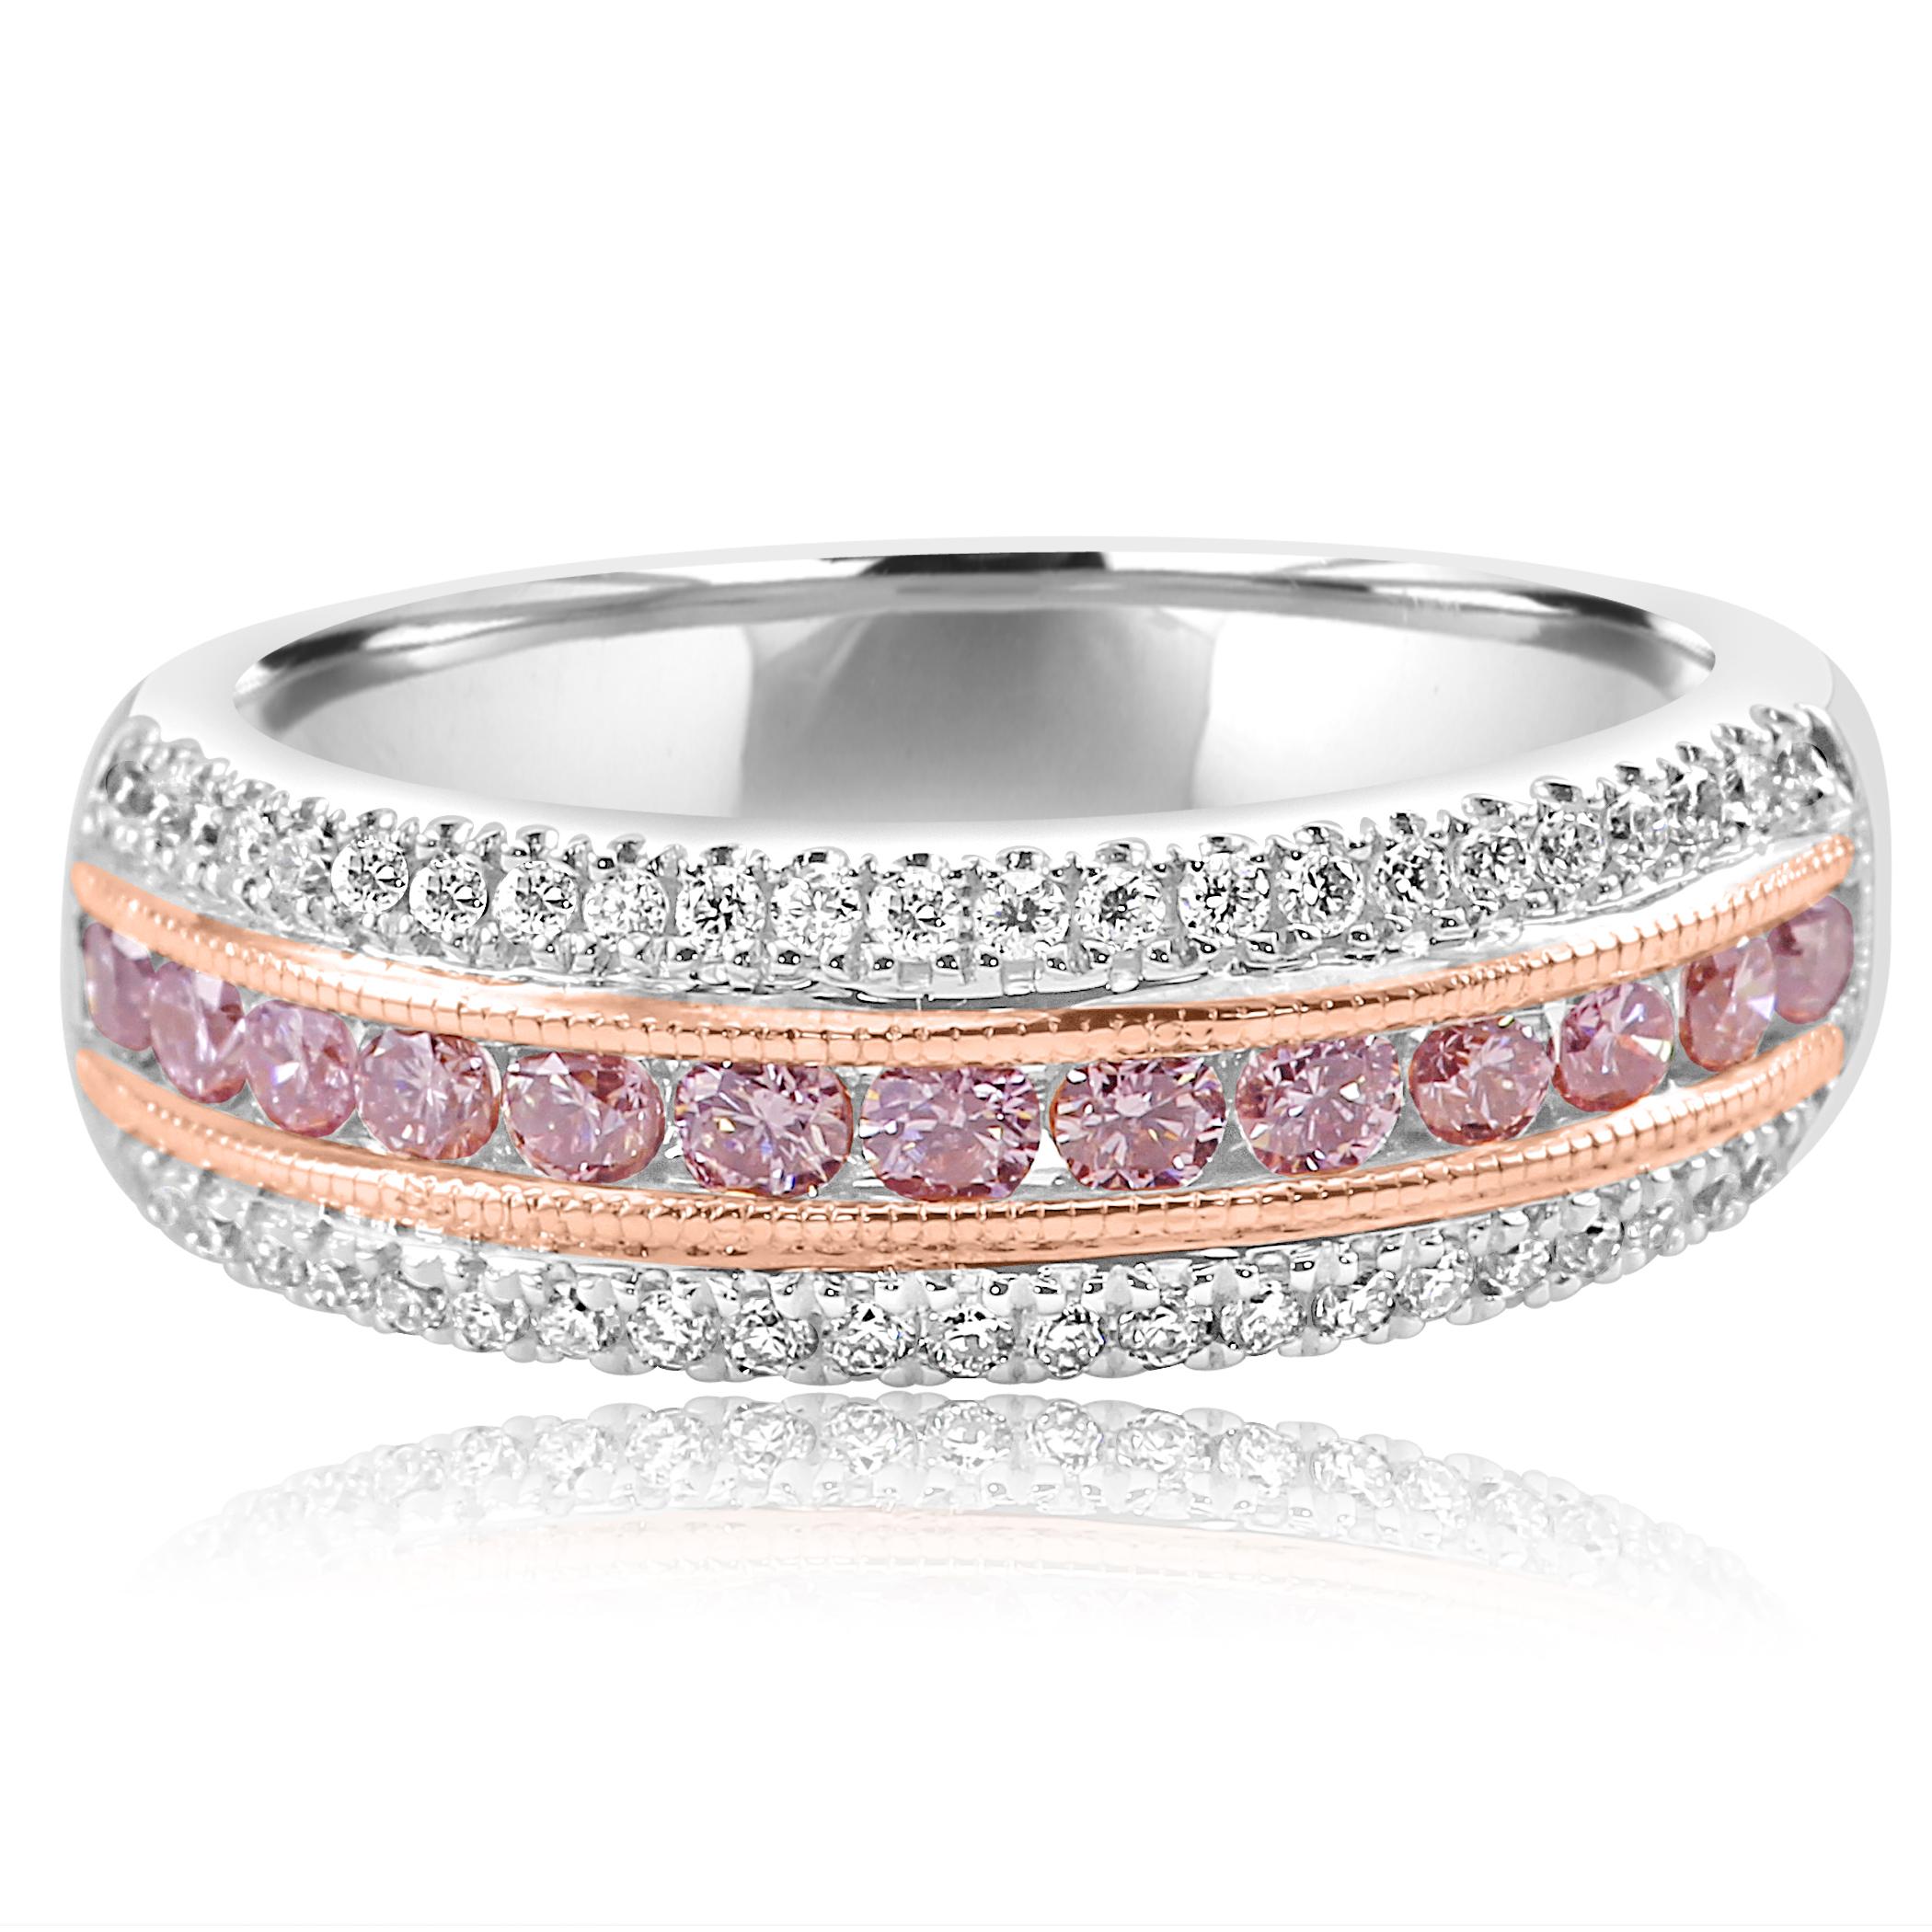 Gorgeous Natural Pink Diamonds 0.47 Carat Flanked By Two Rows of White Diamond Round on the Sides 0.28 Carat  in 18K White and Rose Gold Band Ring.

Total Diamond Weight 0.75 Carat

Style available in different price ranges, can be customized or